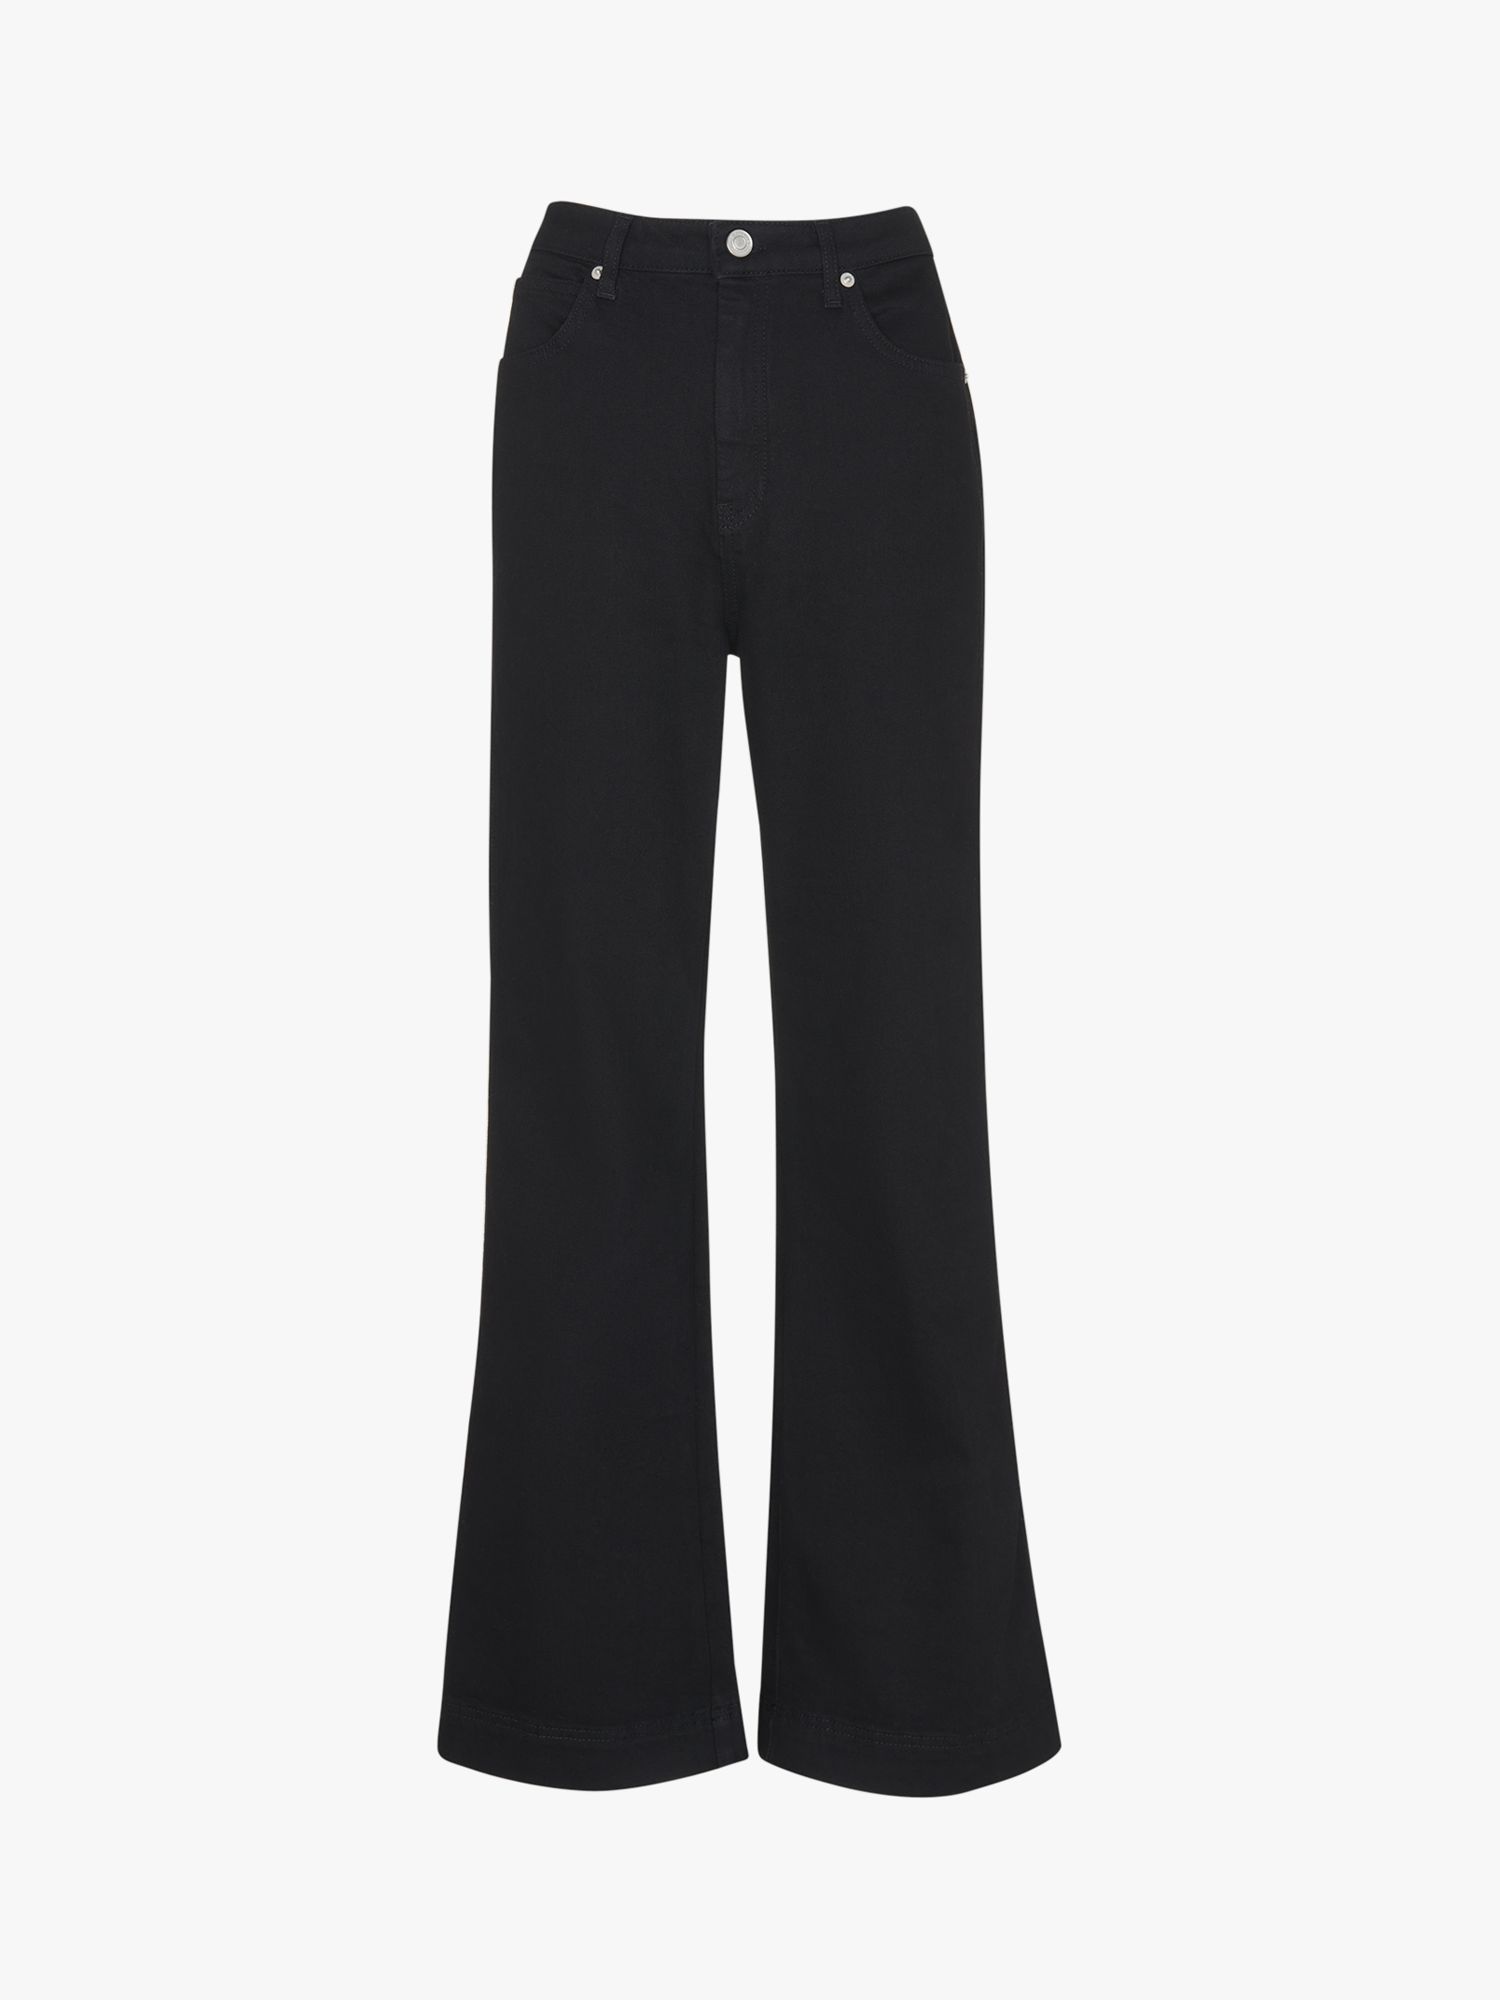 Whistles Lucy Stretched Flared Jeans, Black, 27